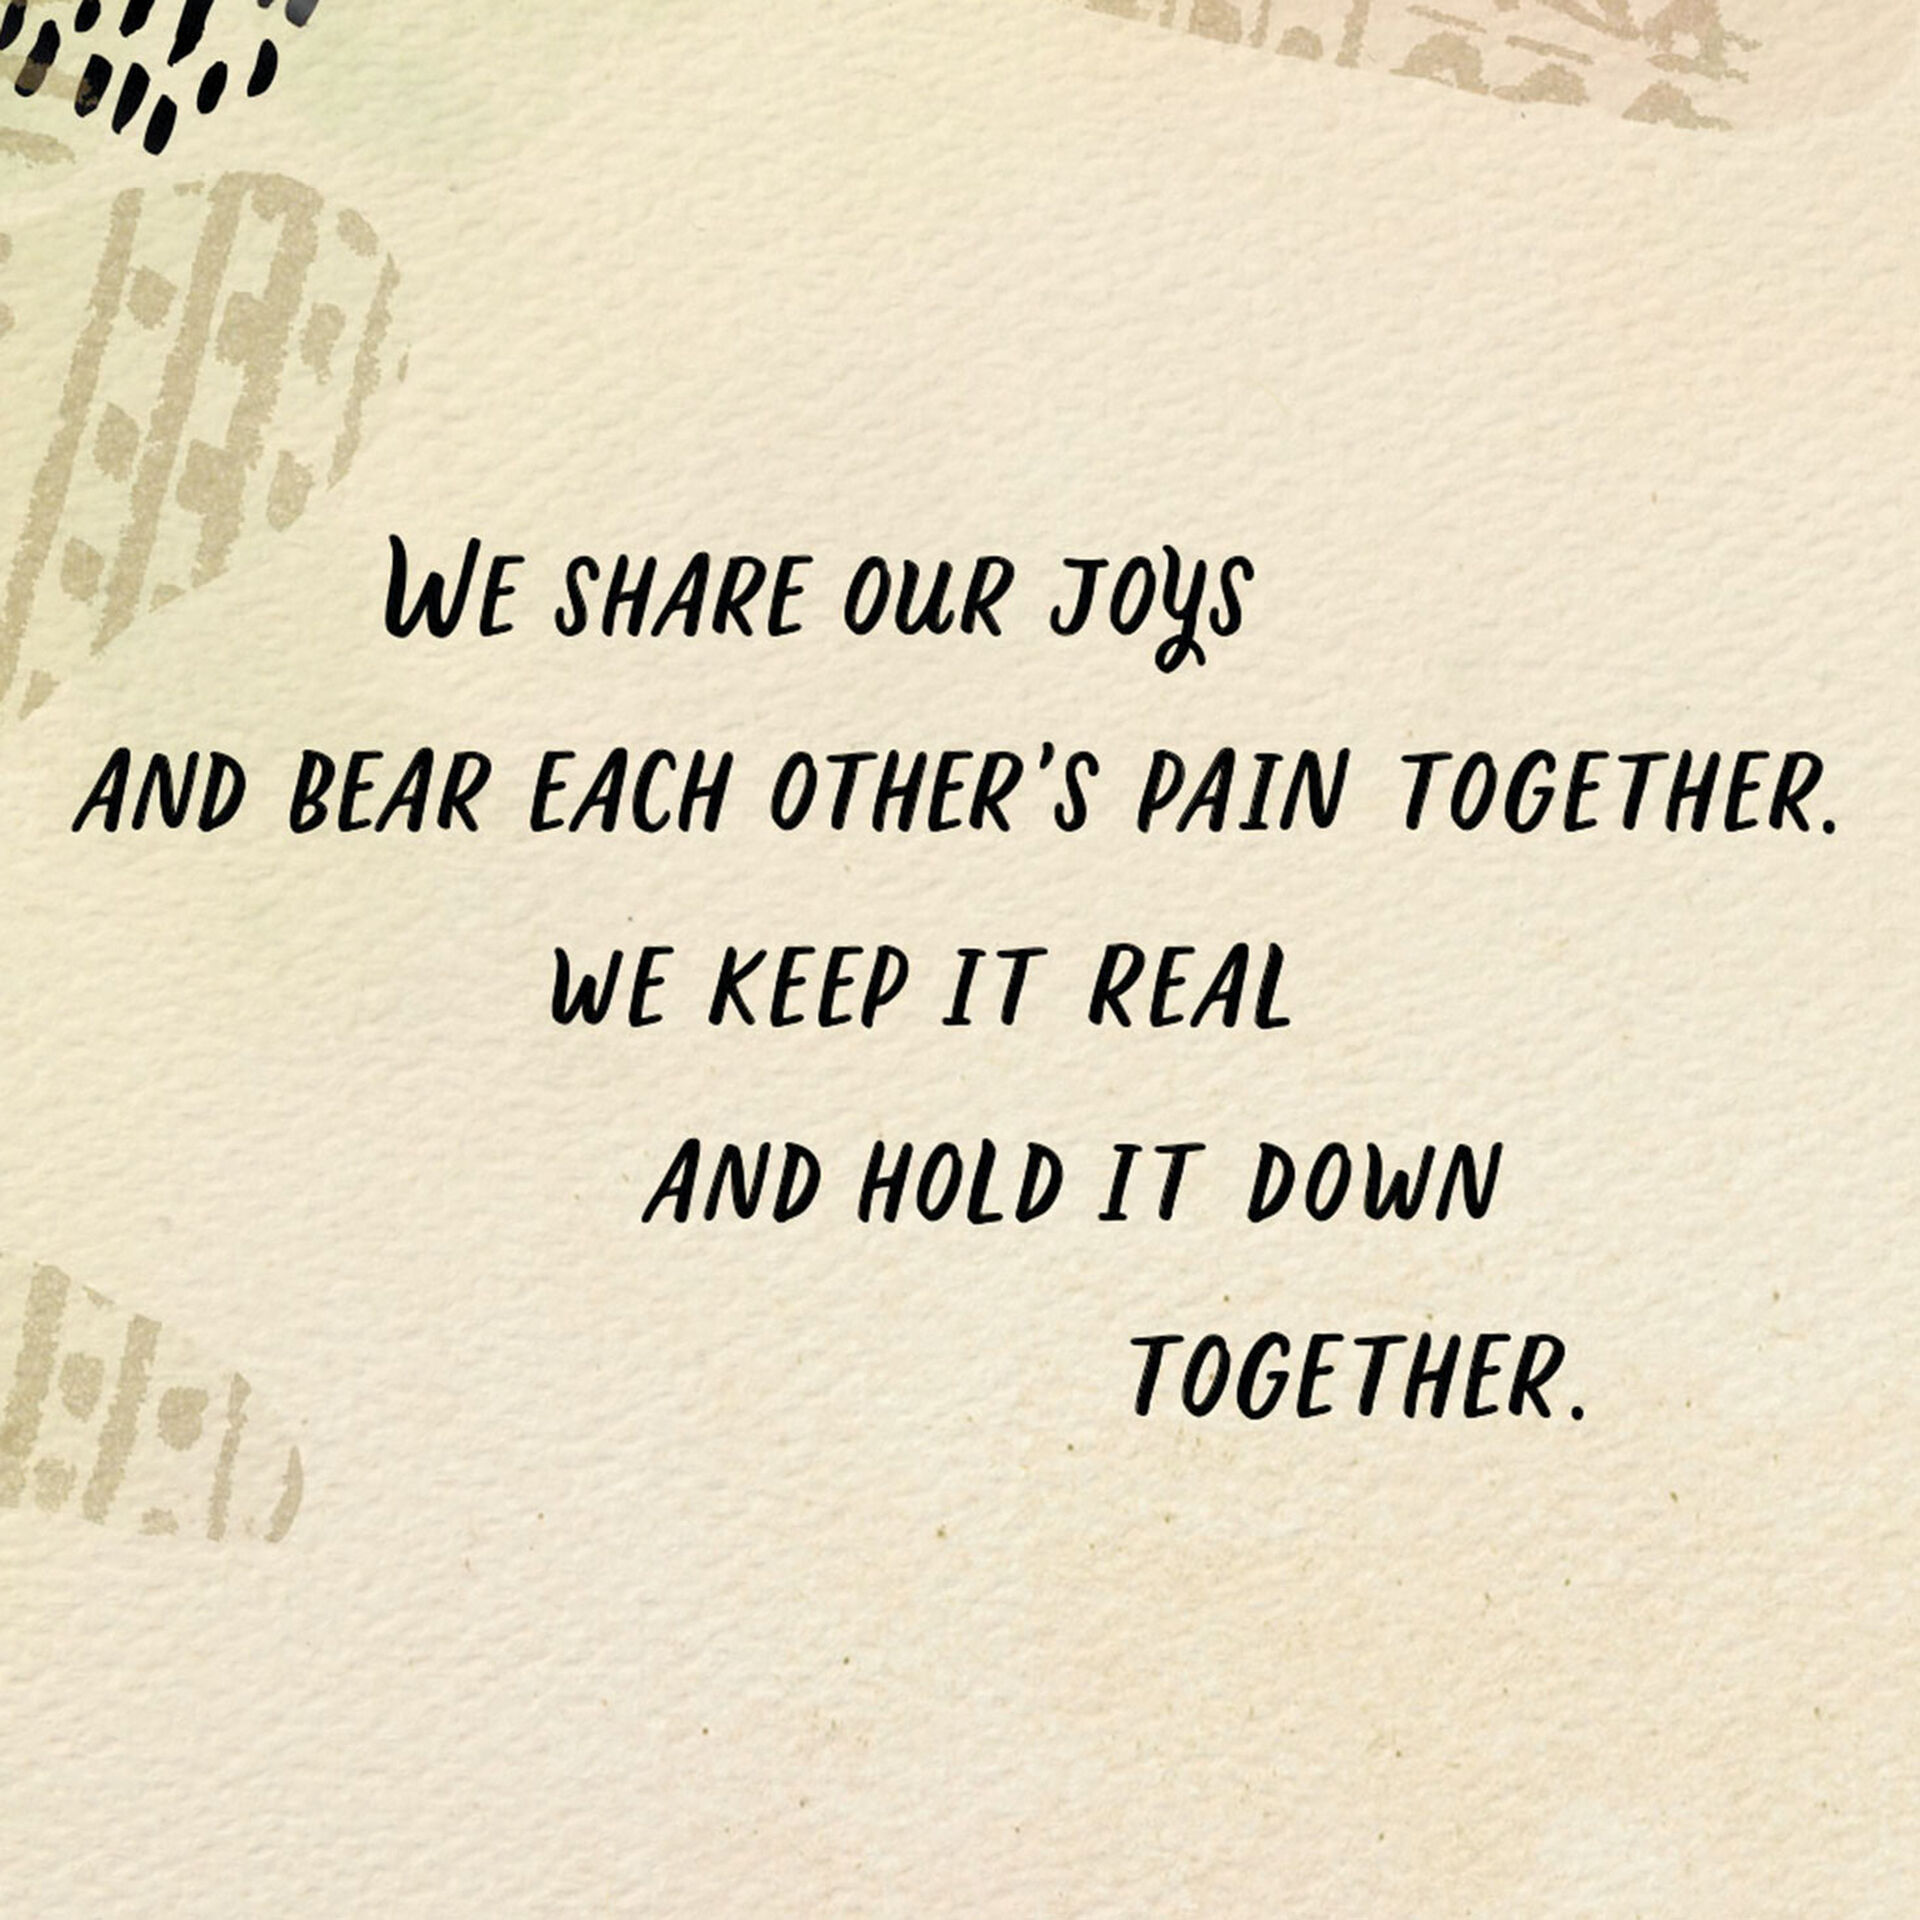 Lettering-&-Patterns-Stand-Together-Encouragement-Card_399MHF1138_02